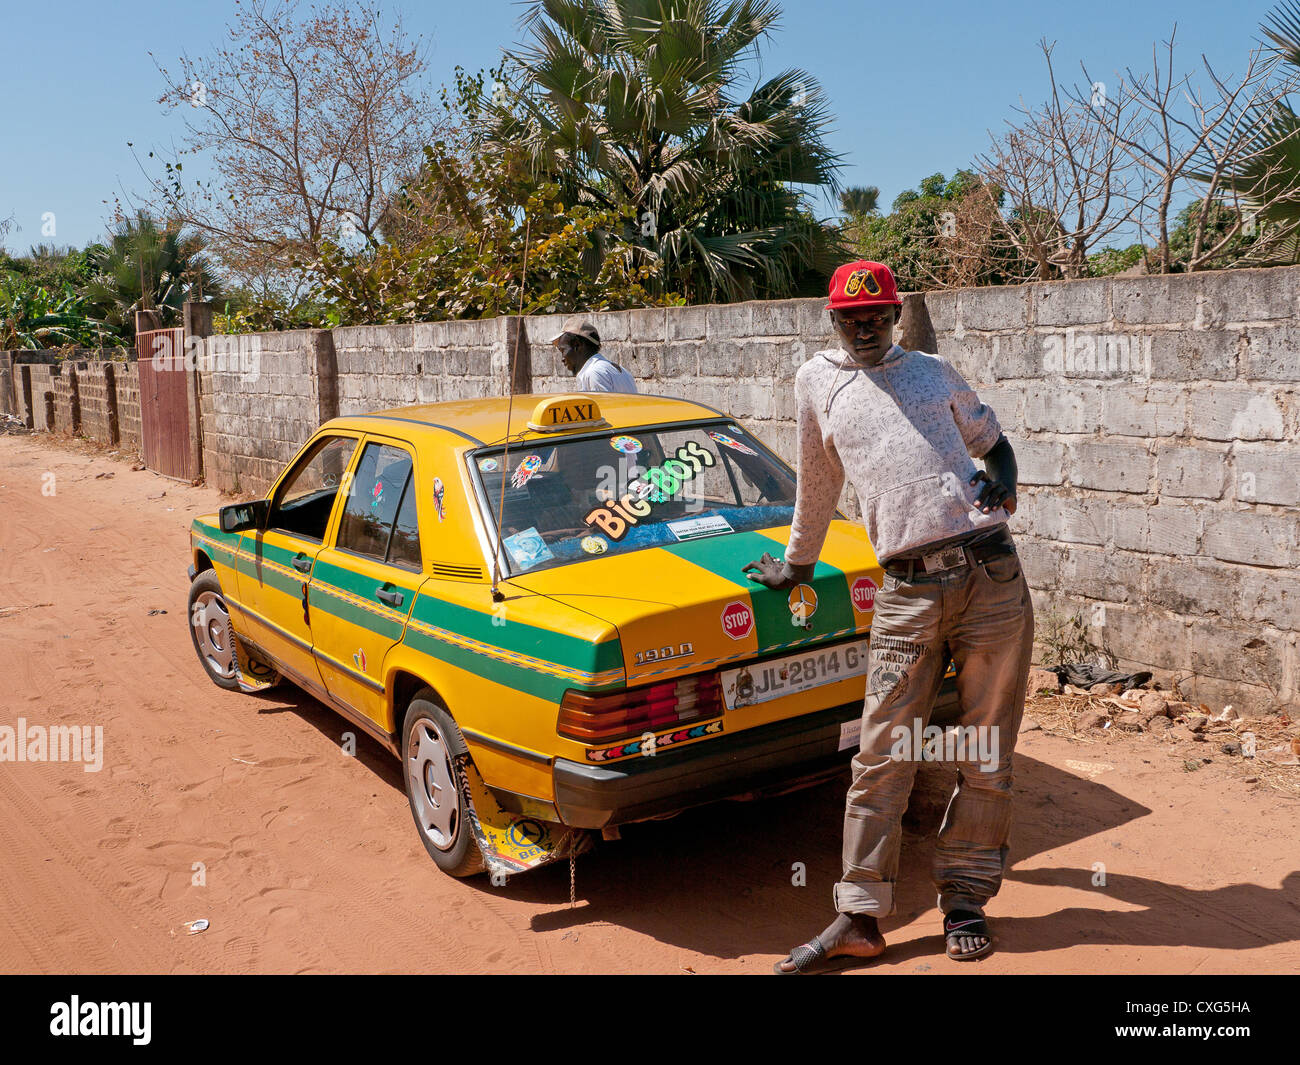 Two men and their yellow taxi on a road in Gambia, Africa Stock Photo